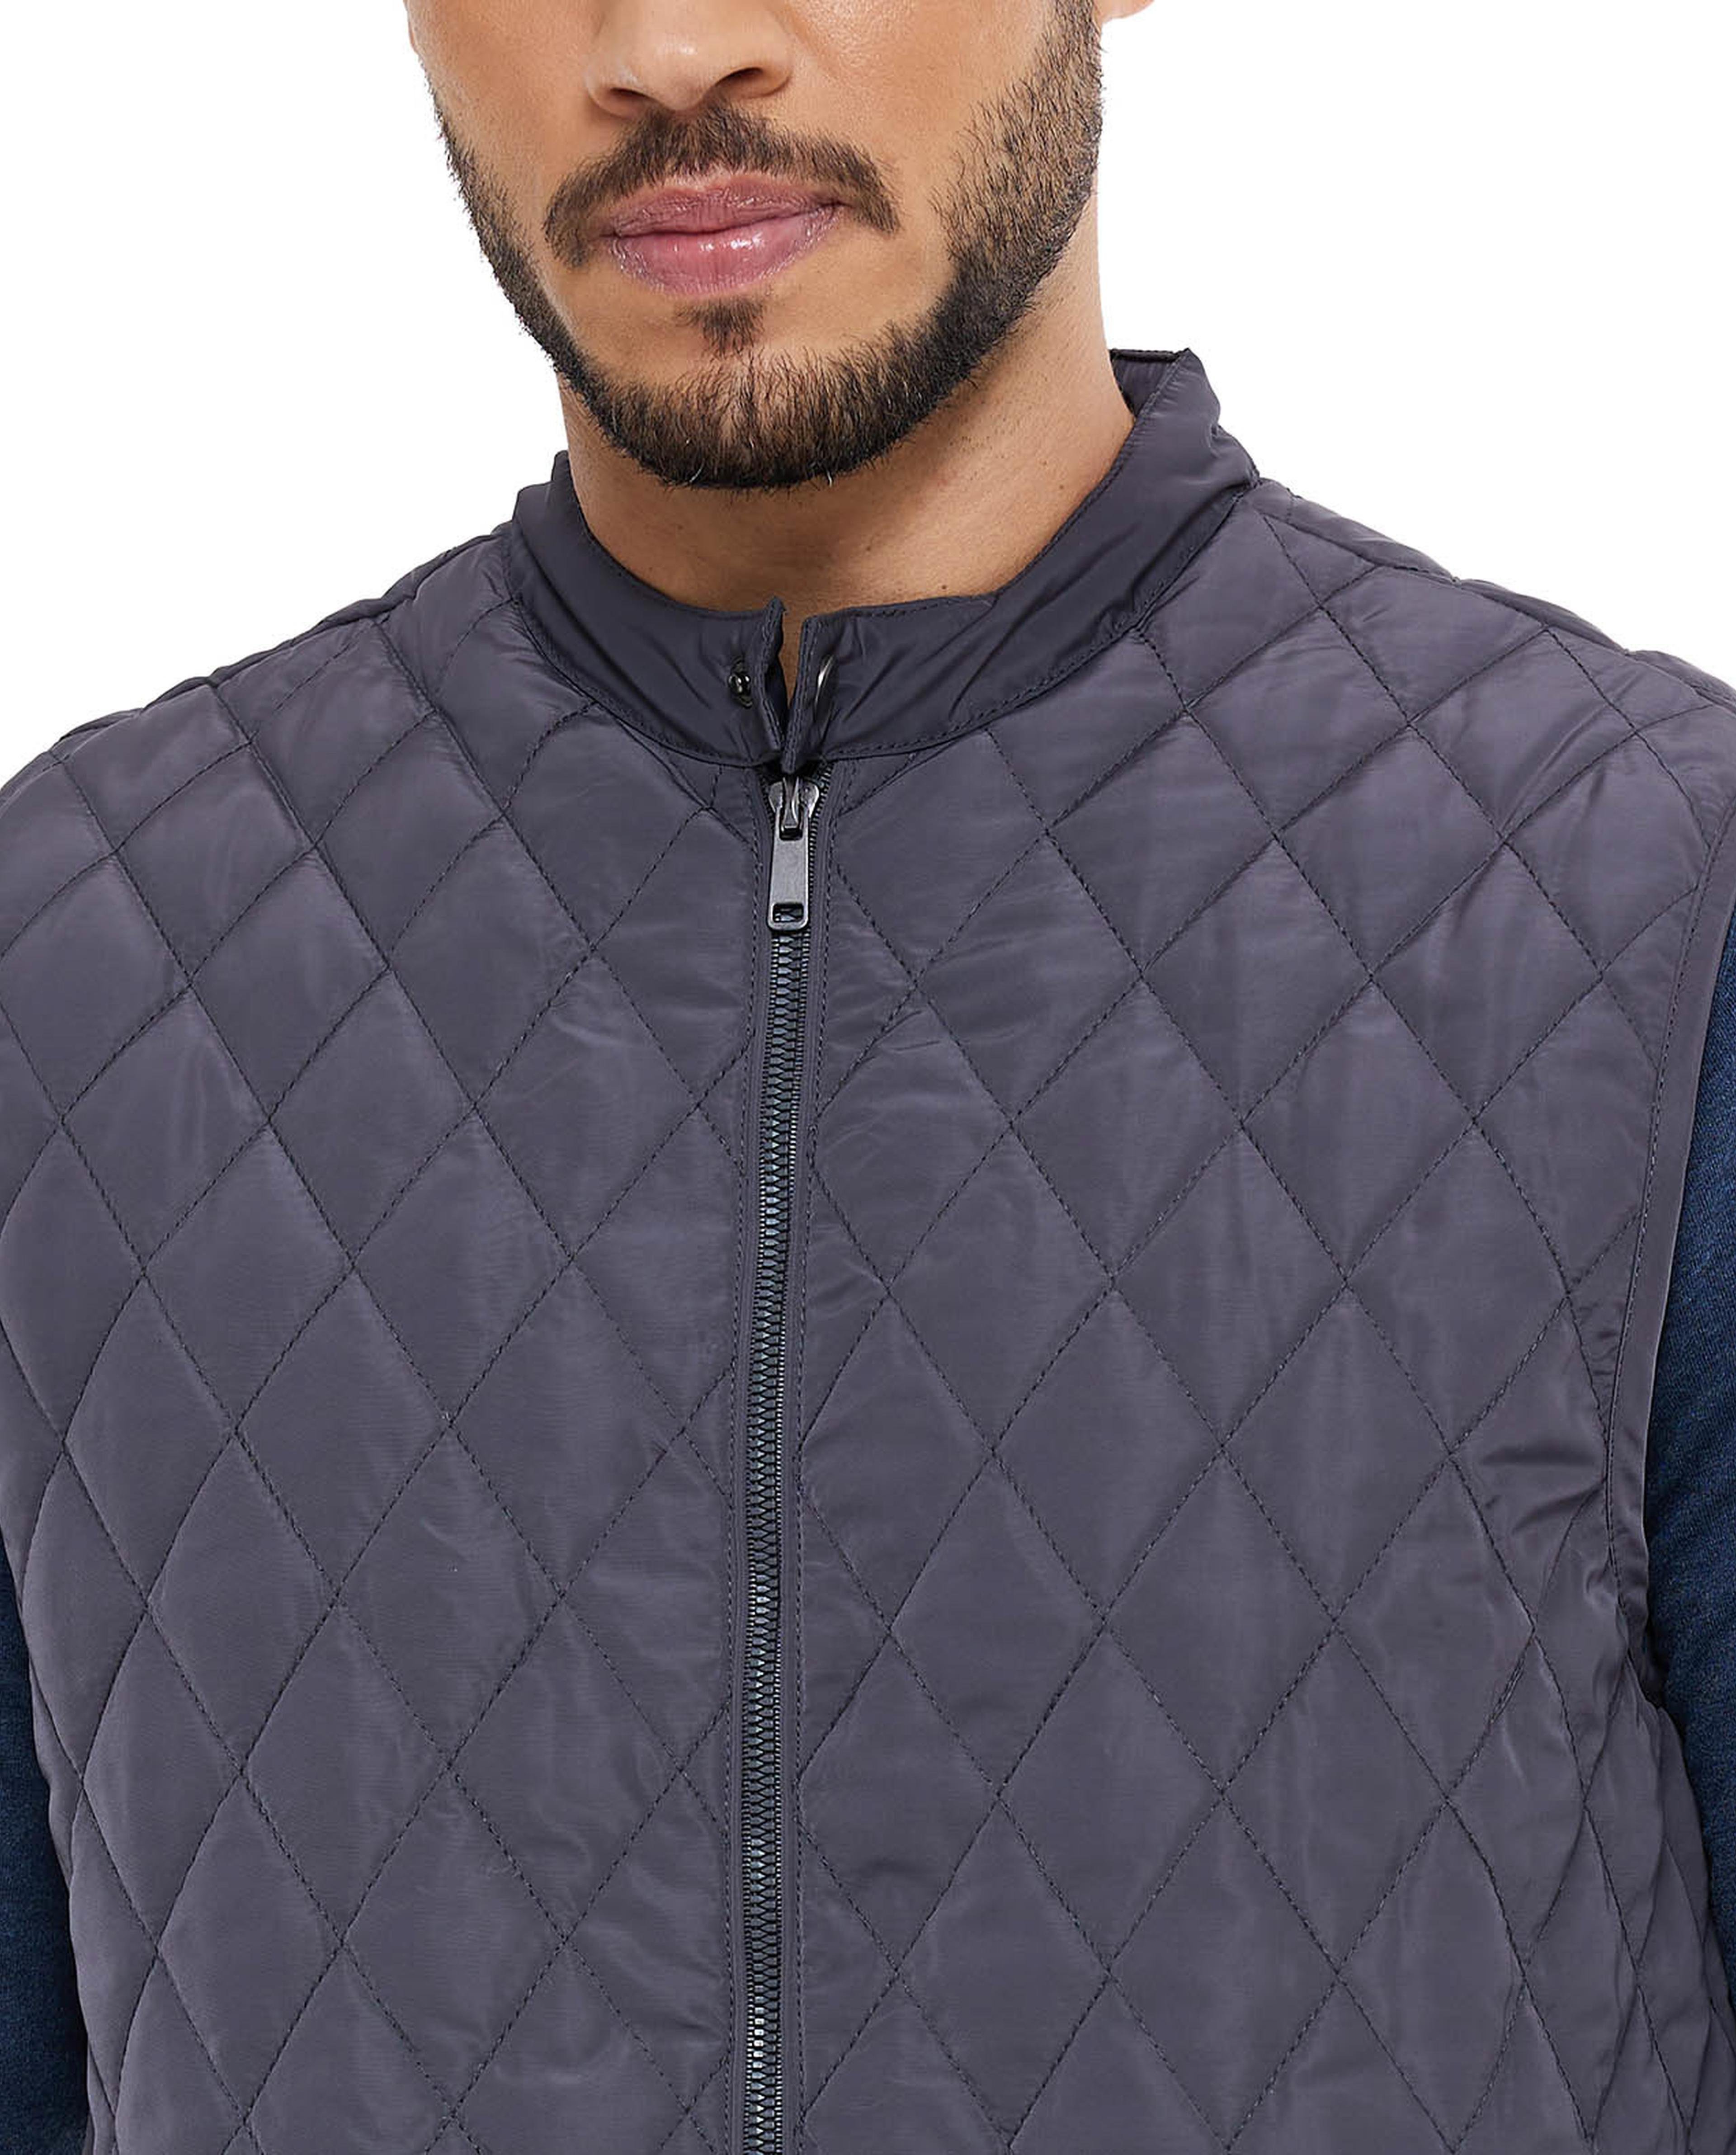 Quilted Vest Jacket with Zipper Front